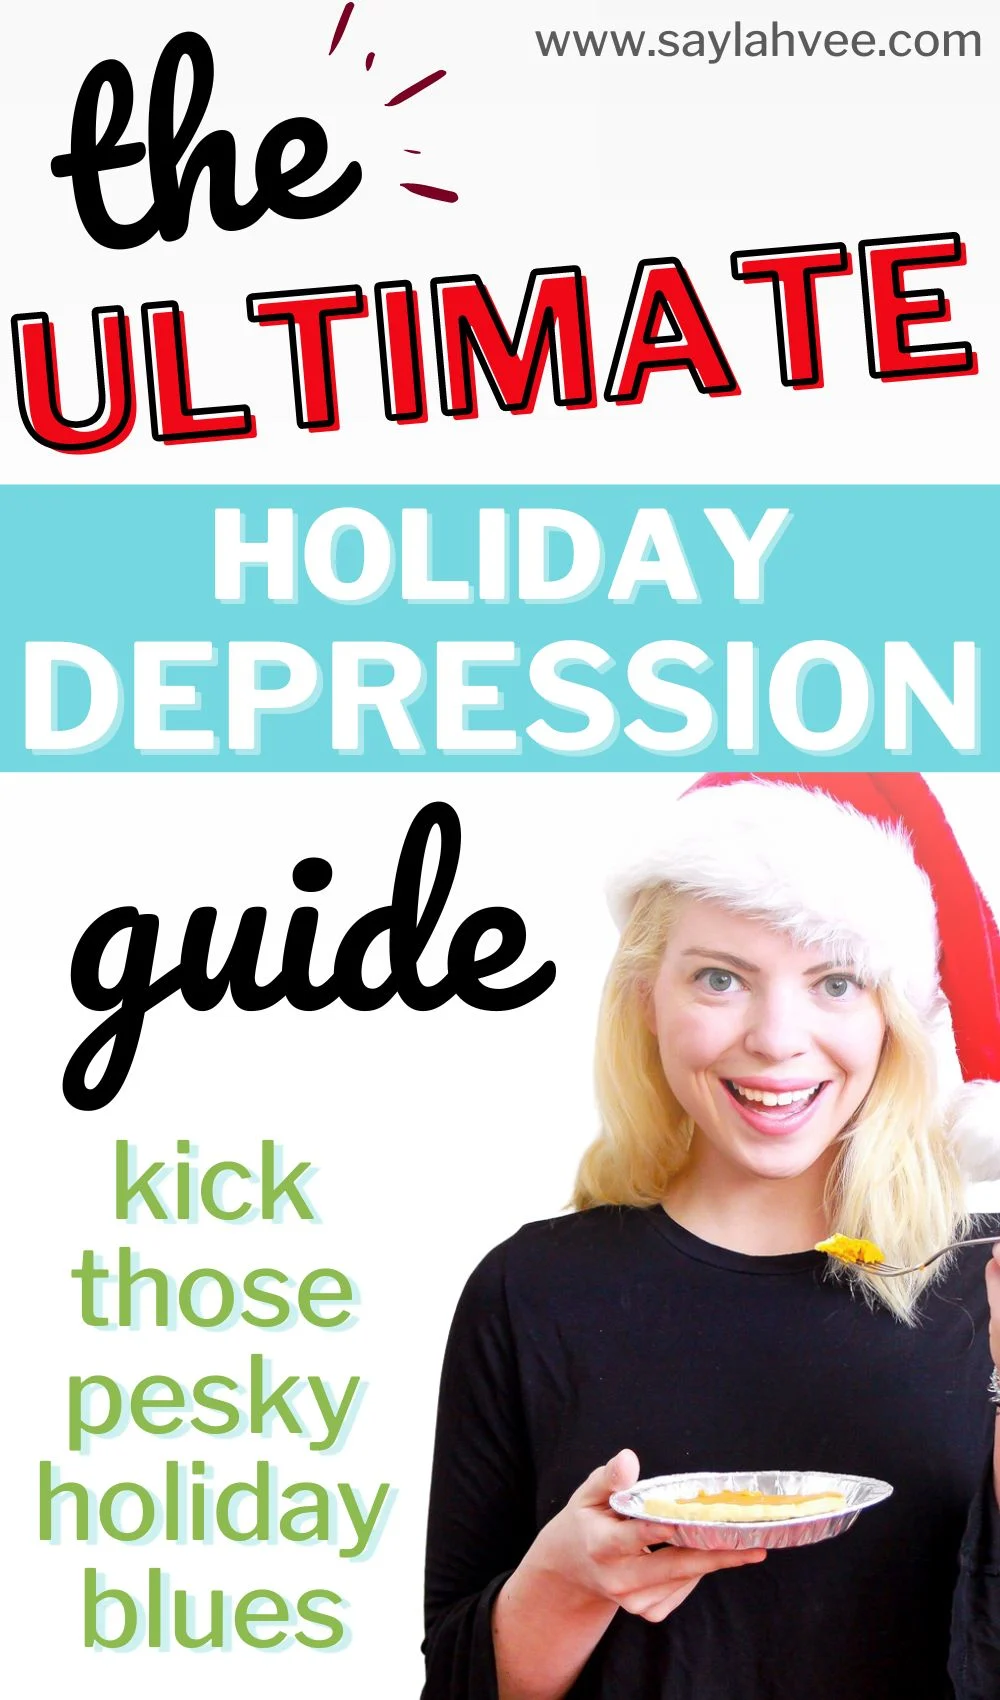 The ultimate holiday depression survival guide - kick those pesky holiday blues